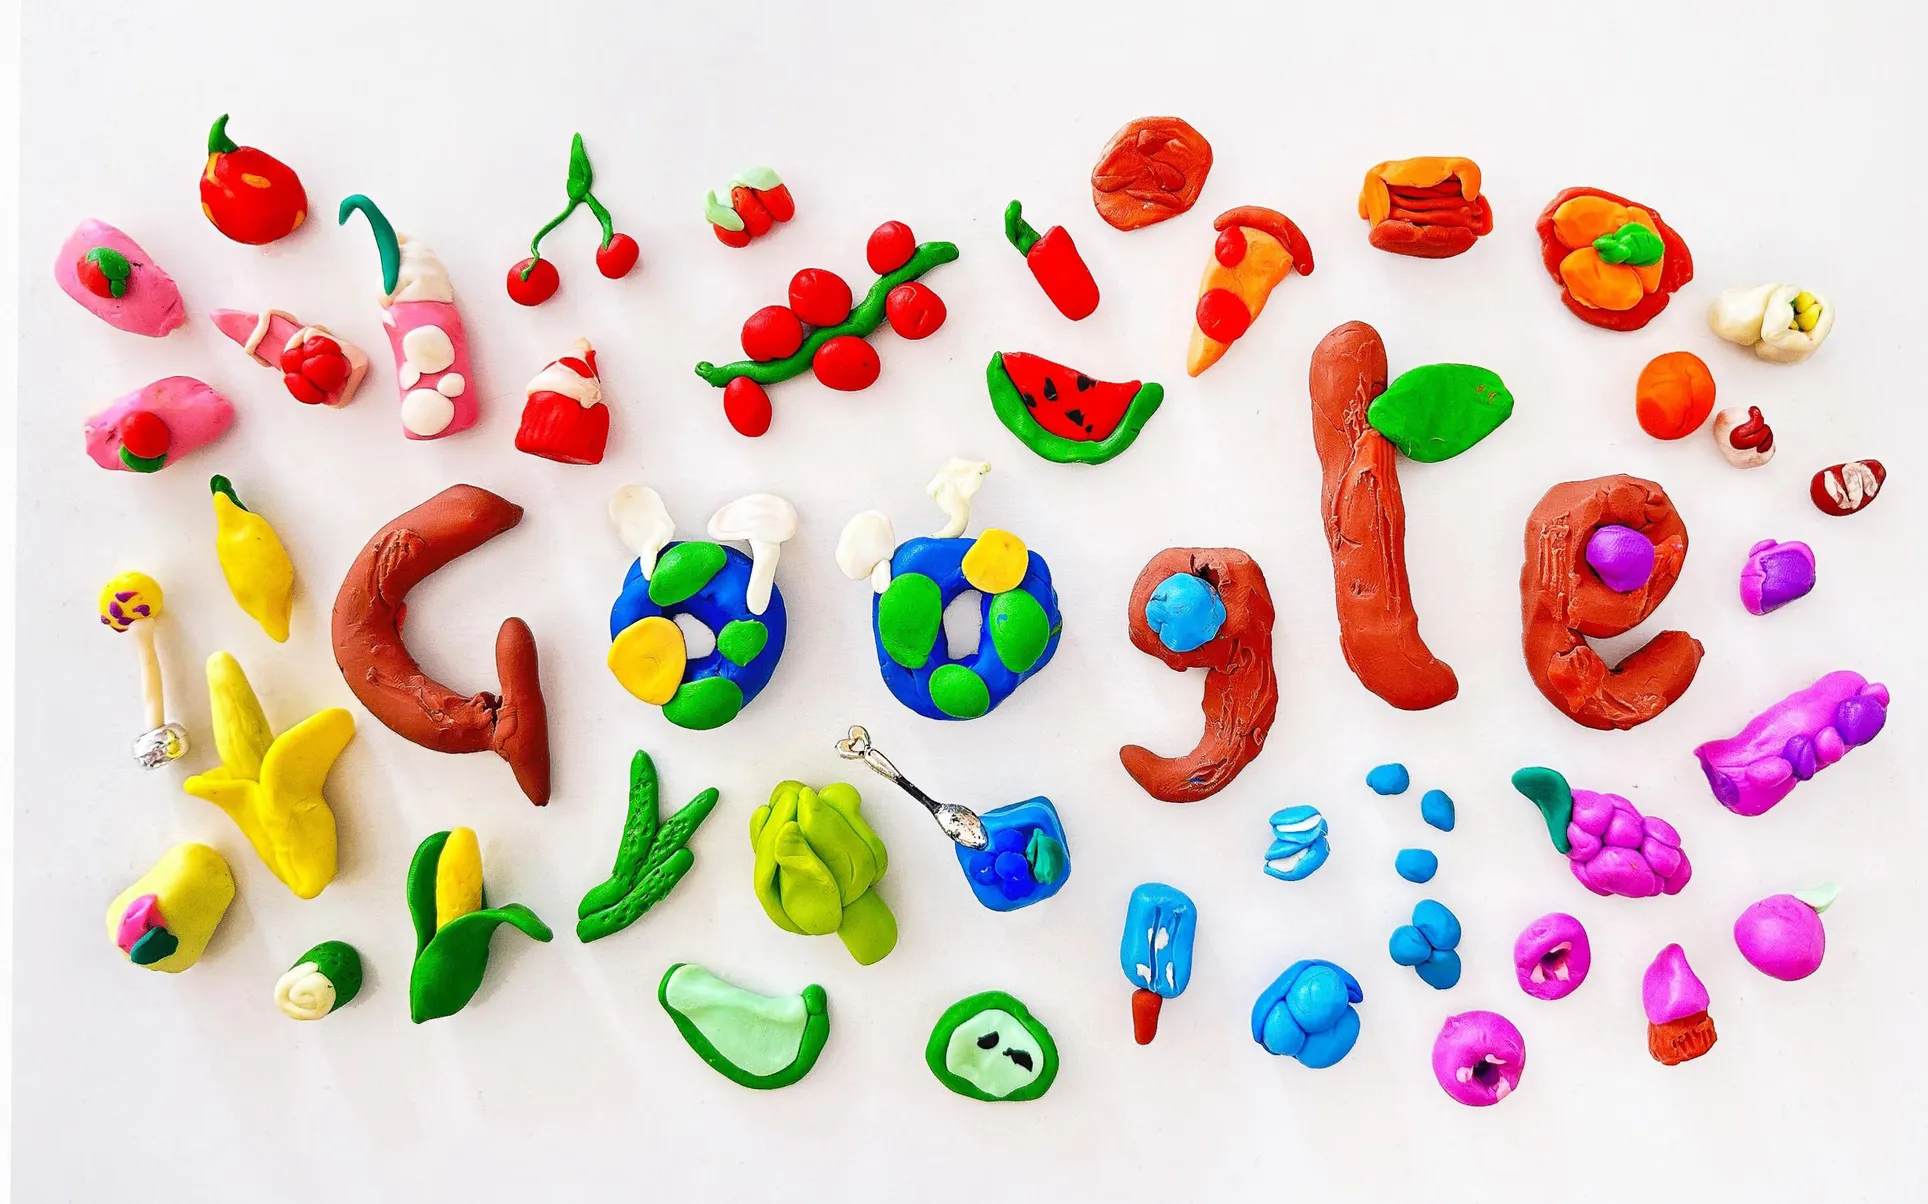 A clay sculpture depicting the Google logo surrounded by various food items. The letter G is formed from red clay. The Os are represented by blue two circles possibly meant to symbolize the Earth. The second G is constructed from red clay with a central blue clay disc. The L is fashioned from red clay with a green appendage, likely a leaf. Finally, the E is created using red clay with a purple clay disc.